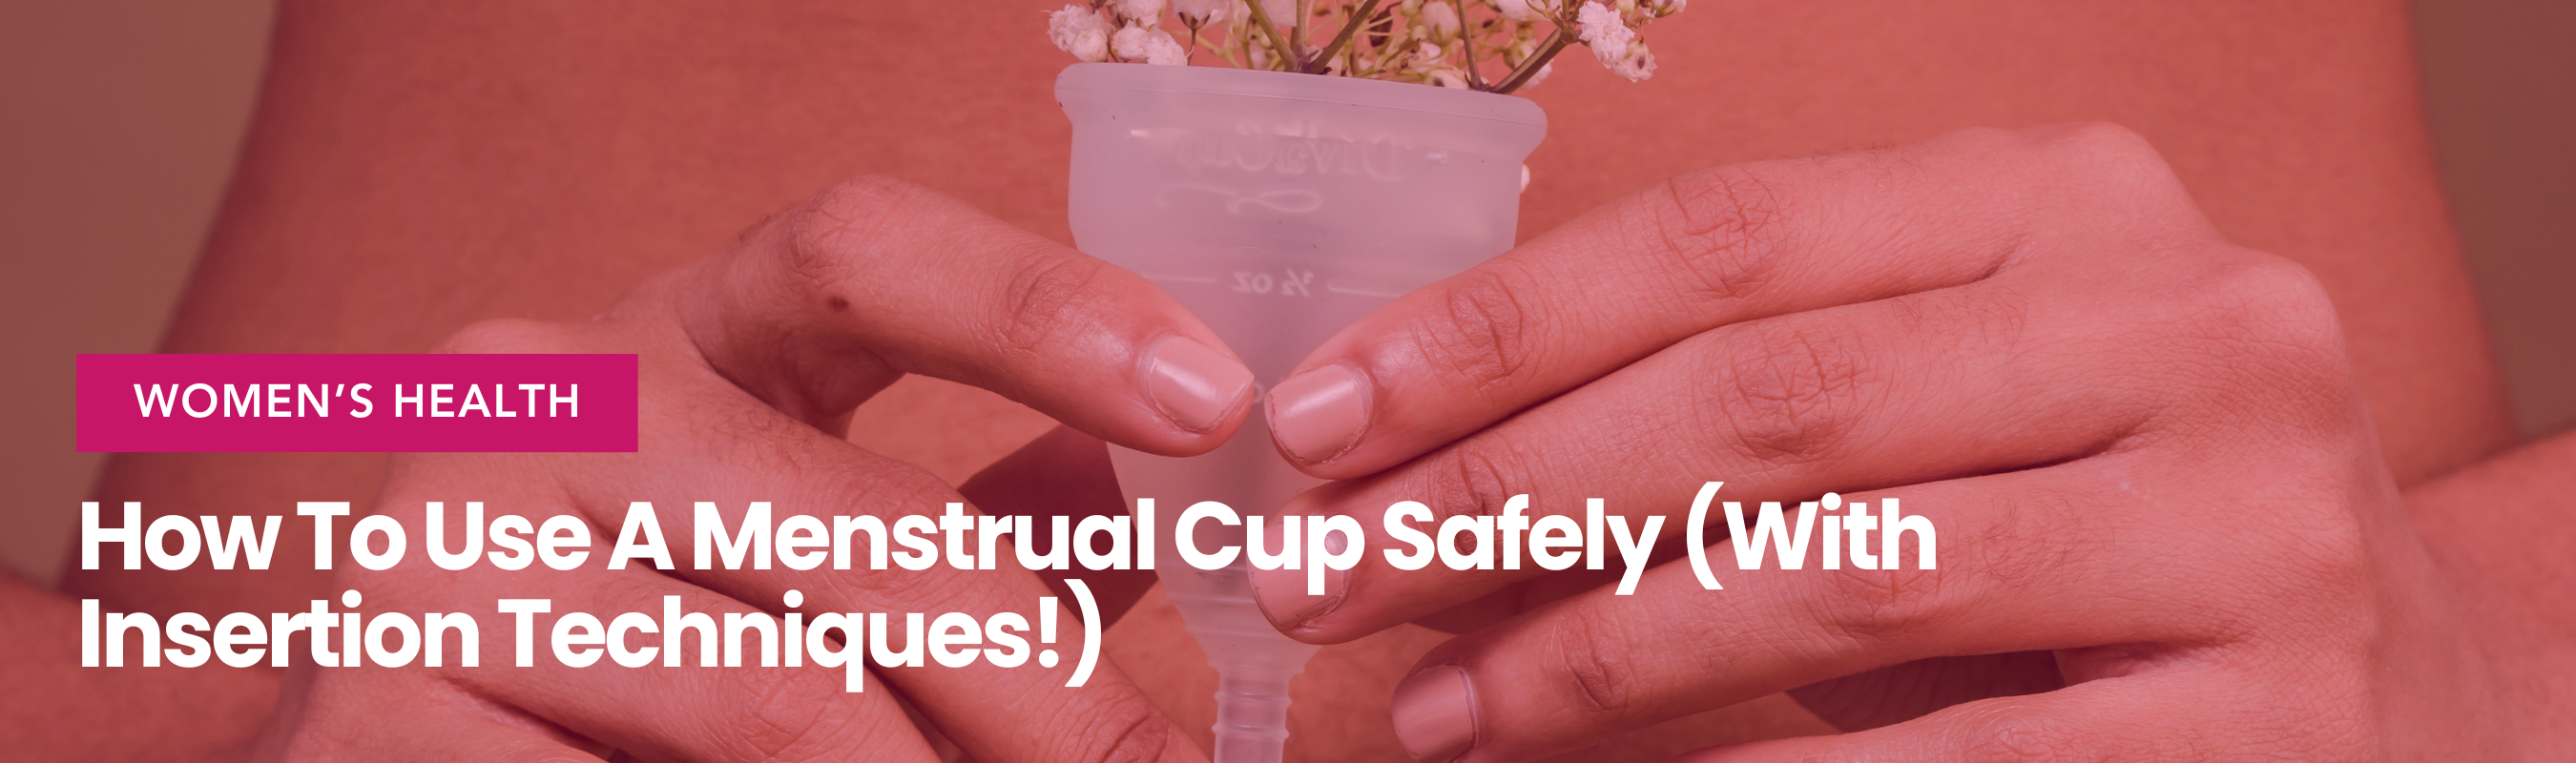 How To Use A Menstrual Cup Safely (With Insertion Techniques!)